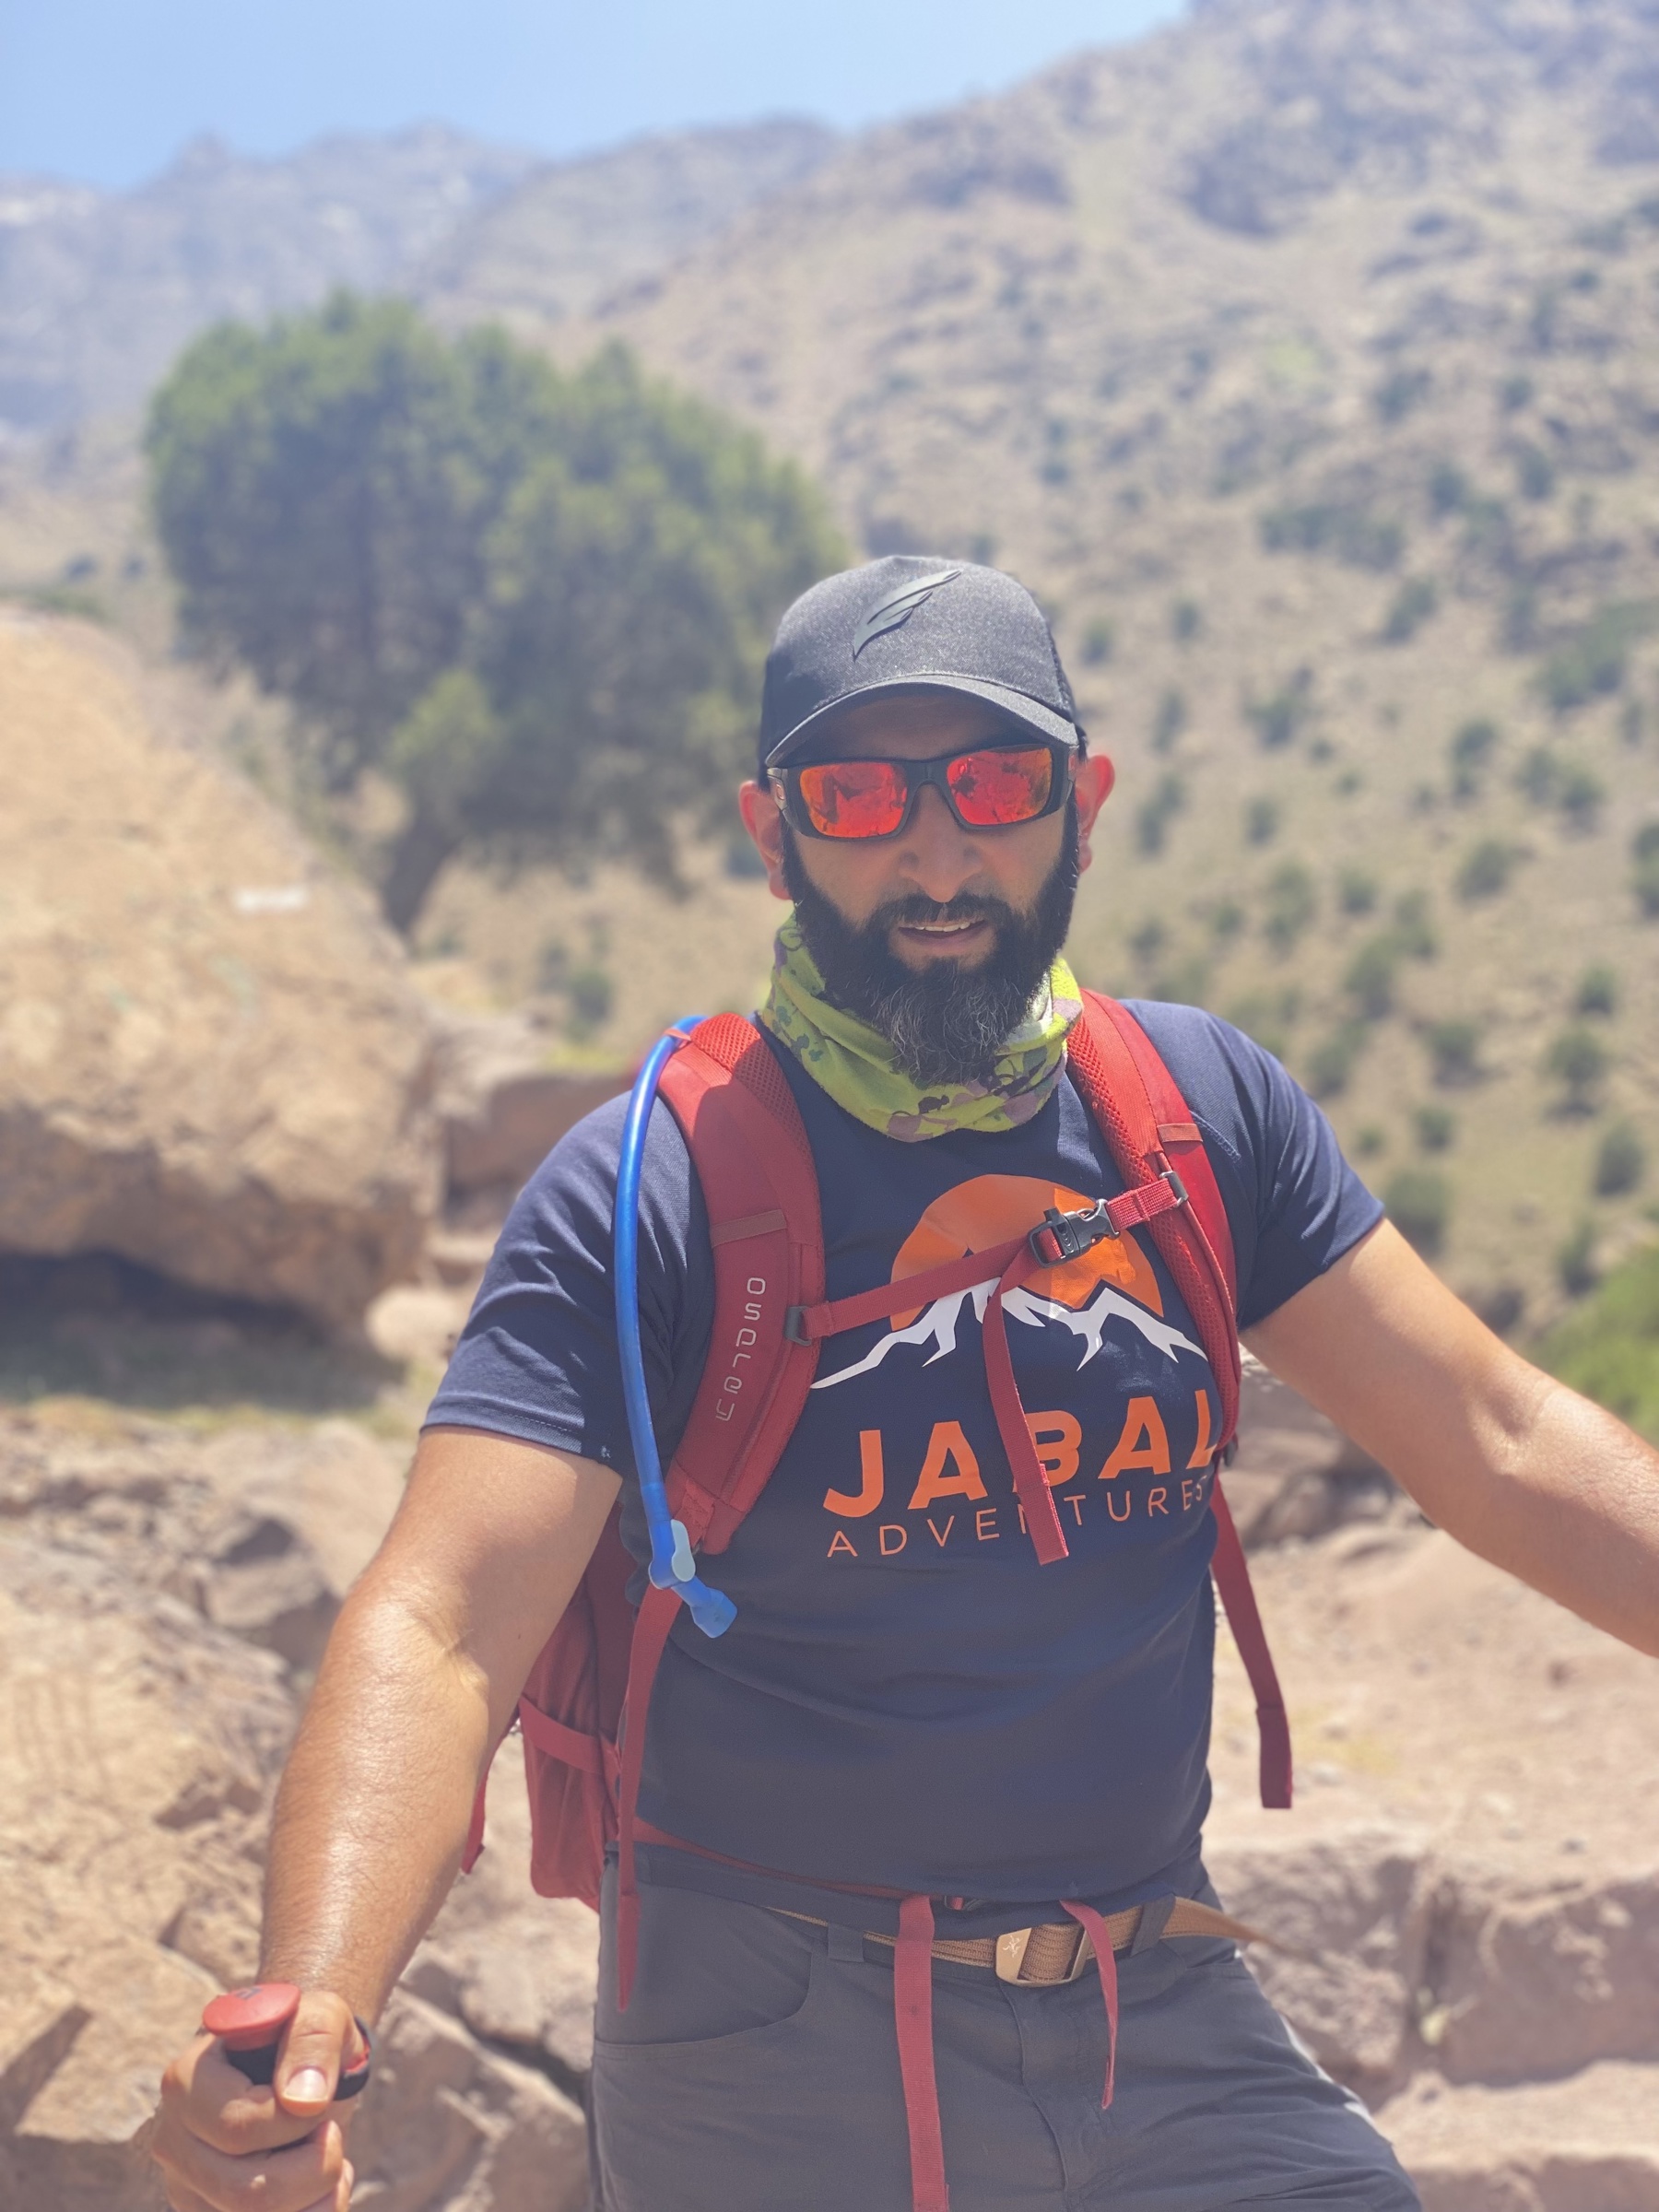 Mahroof is hiking in hot weather. He’s wearing sunglasses and a hat, while stood in front of sandy rocks and sparse trees.